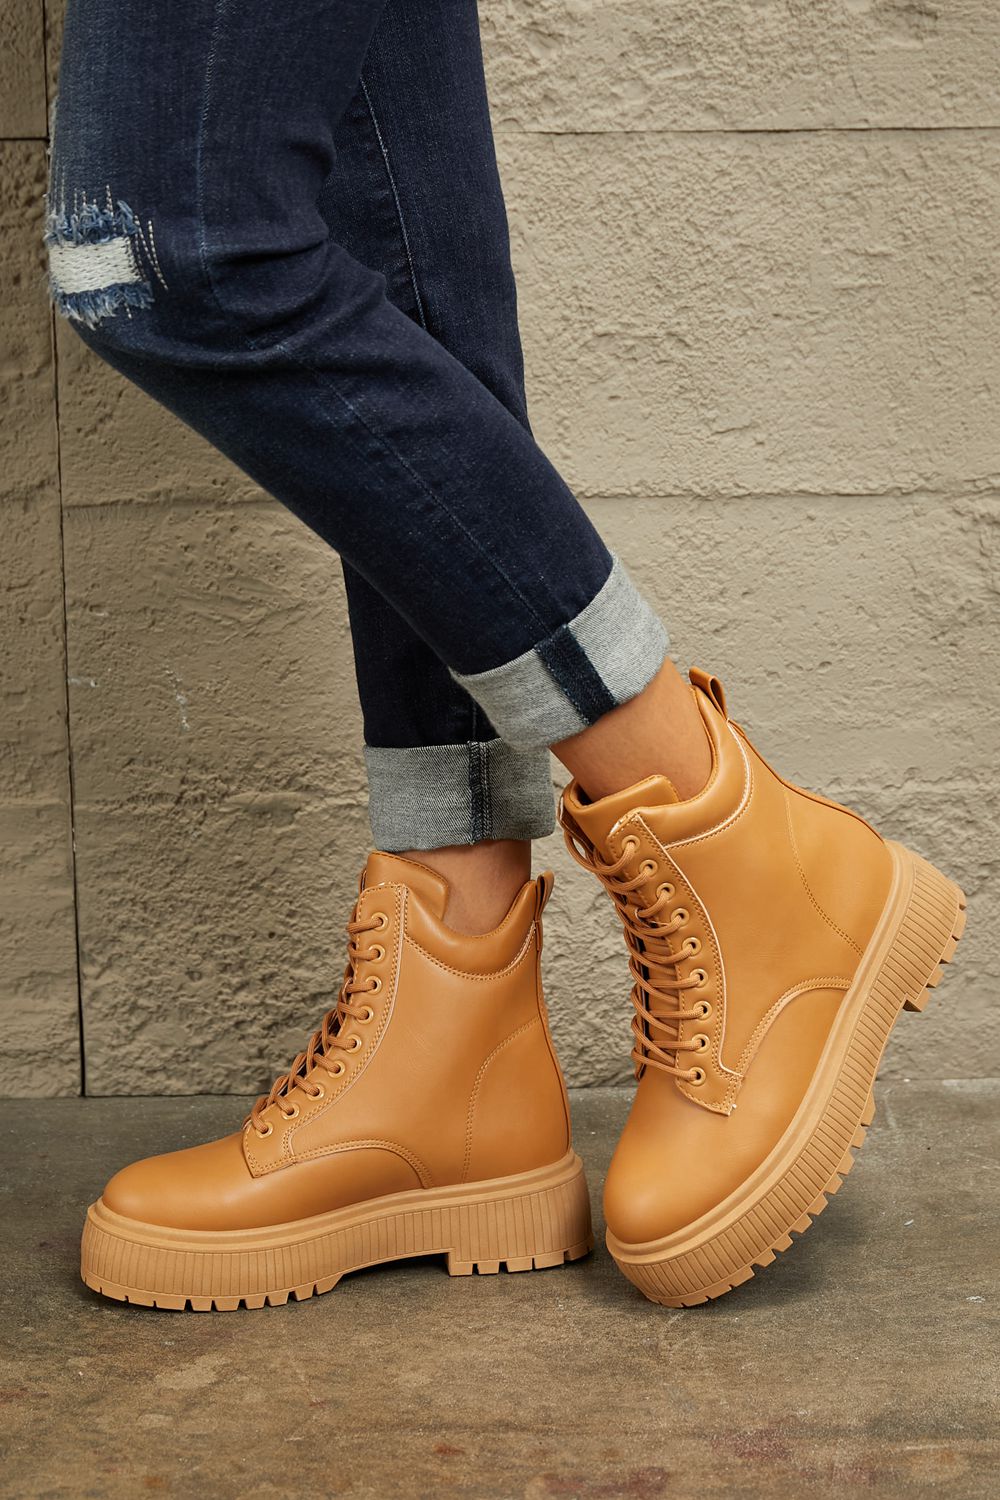 Chic Caramel Cityscape Boots